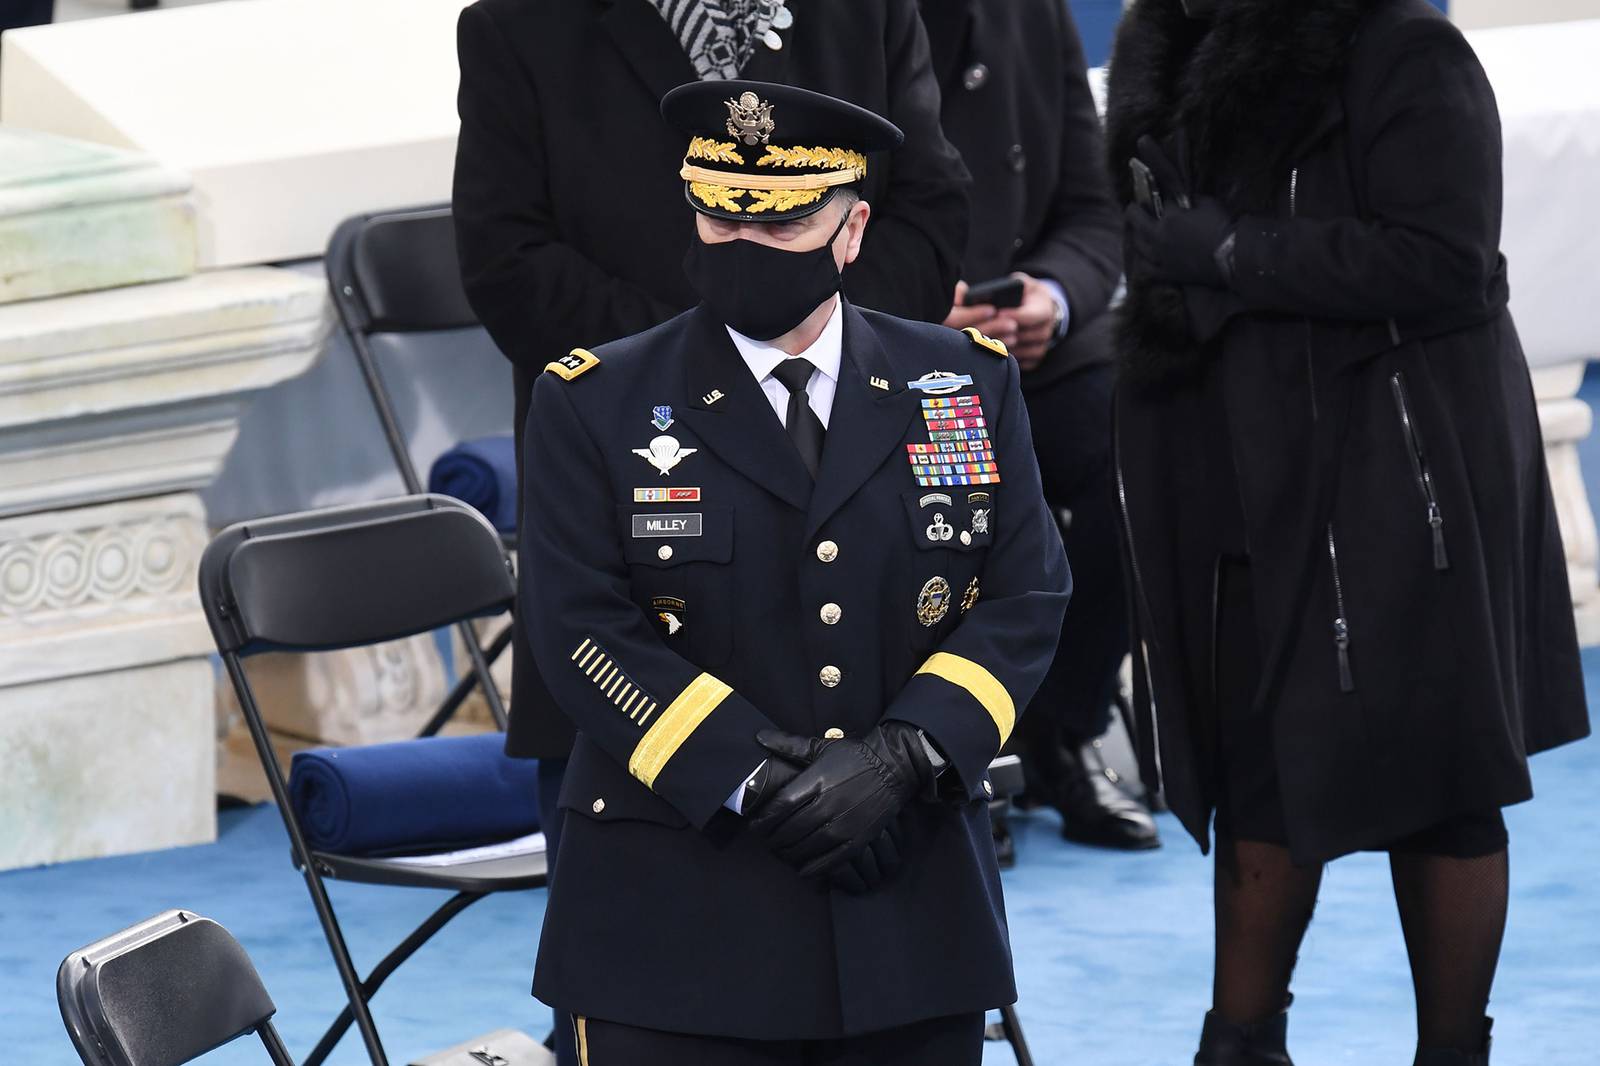 Biden inaugurated commander in chief amid heavy military presence at